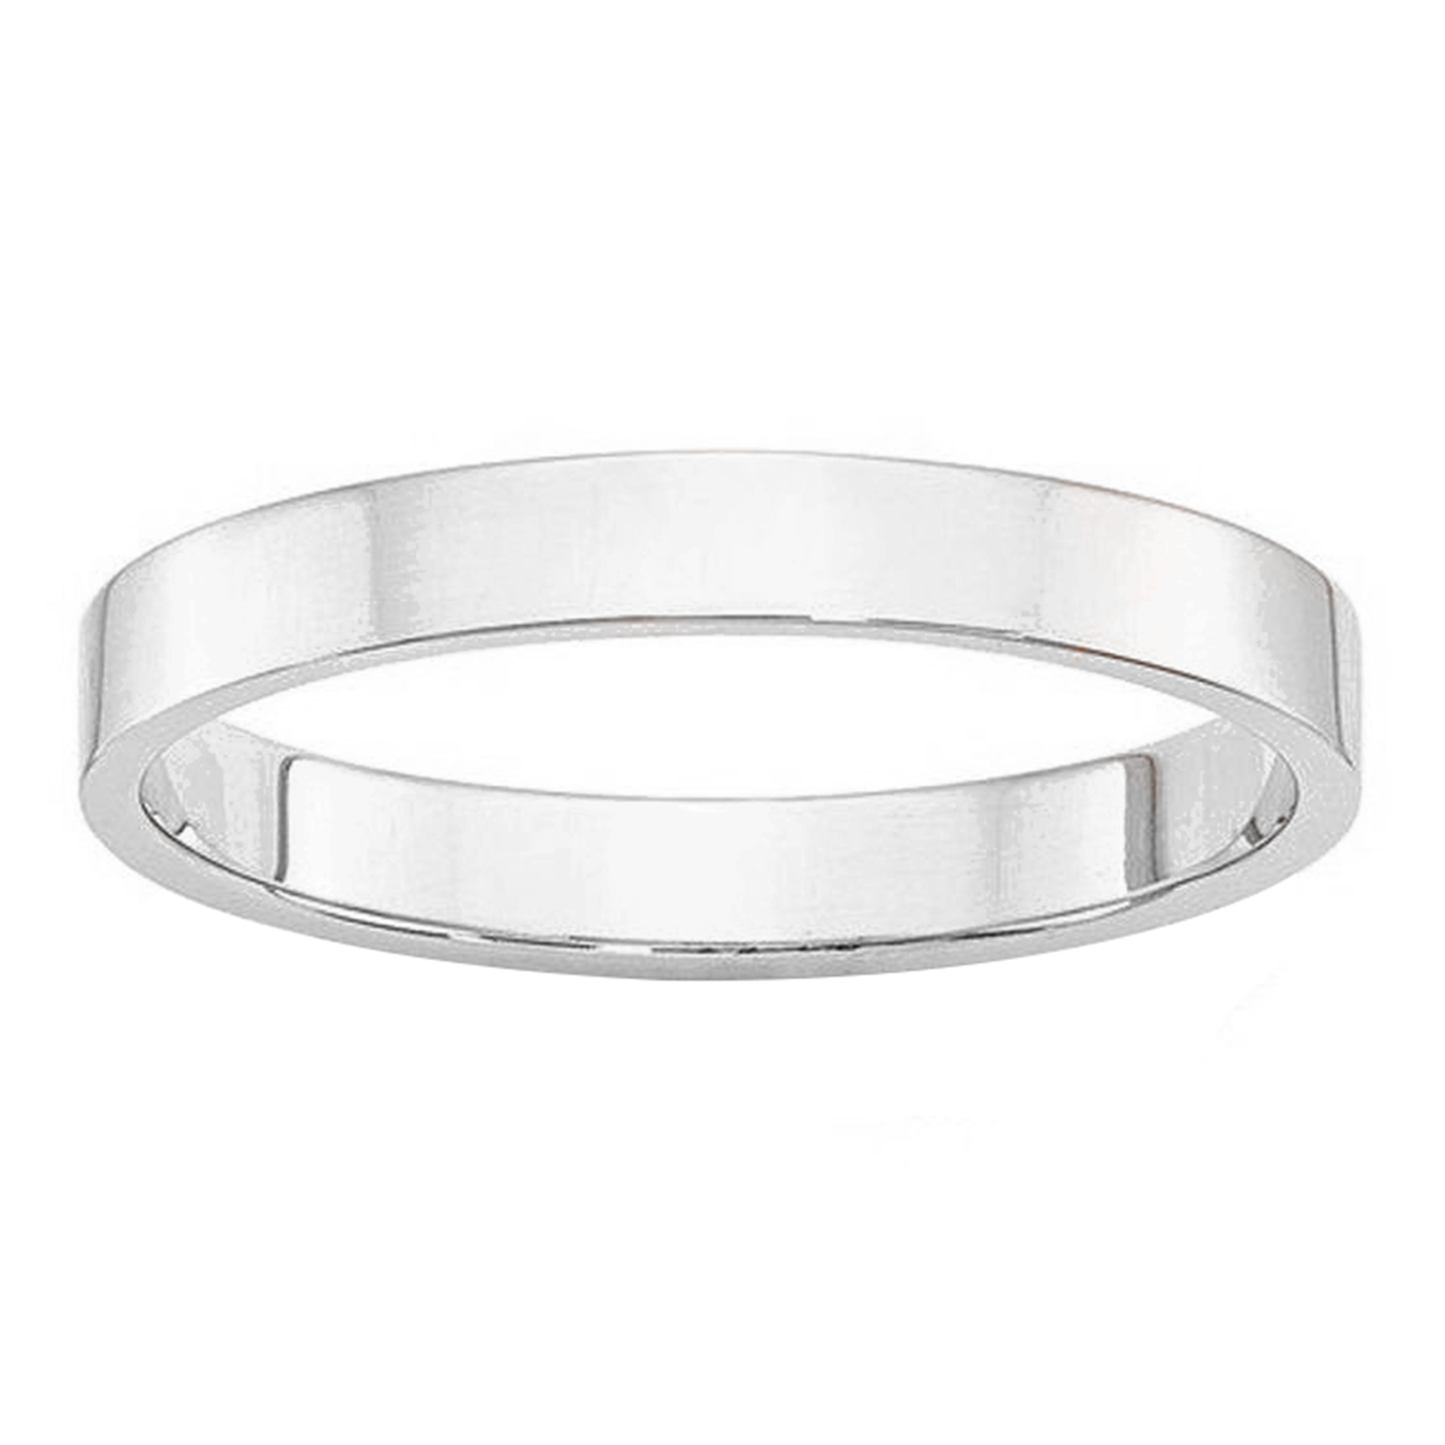 Male Classic Wedding Band In Standard Fit